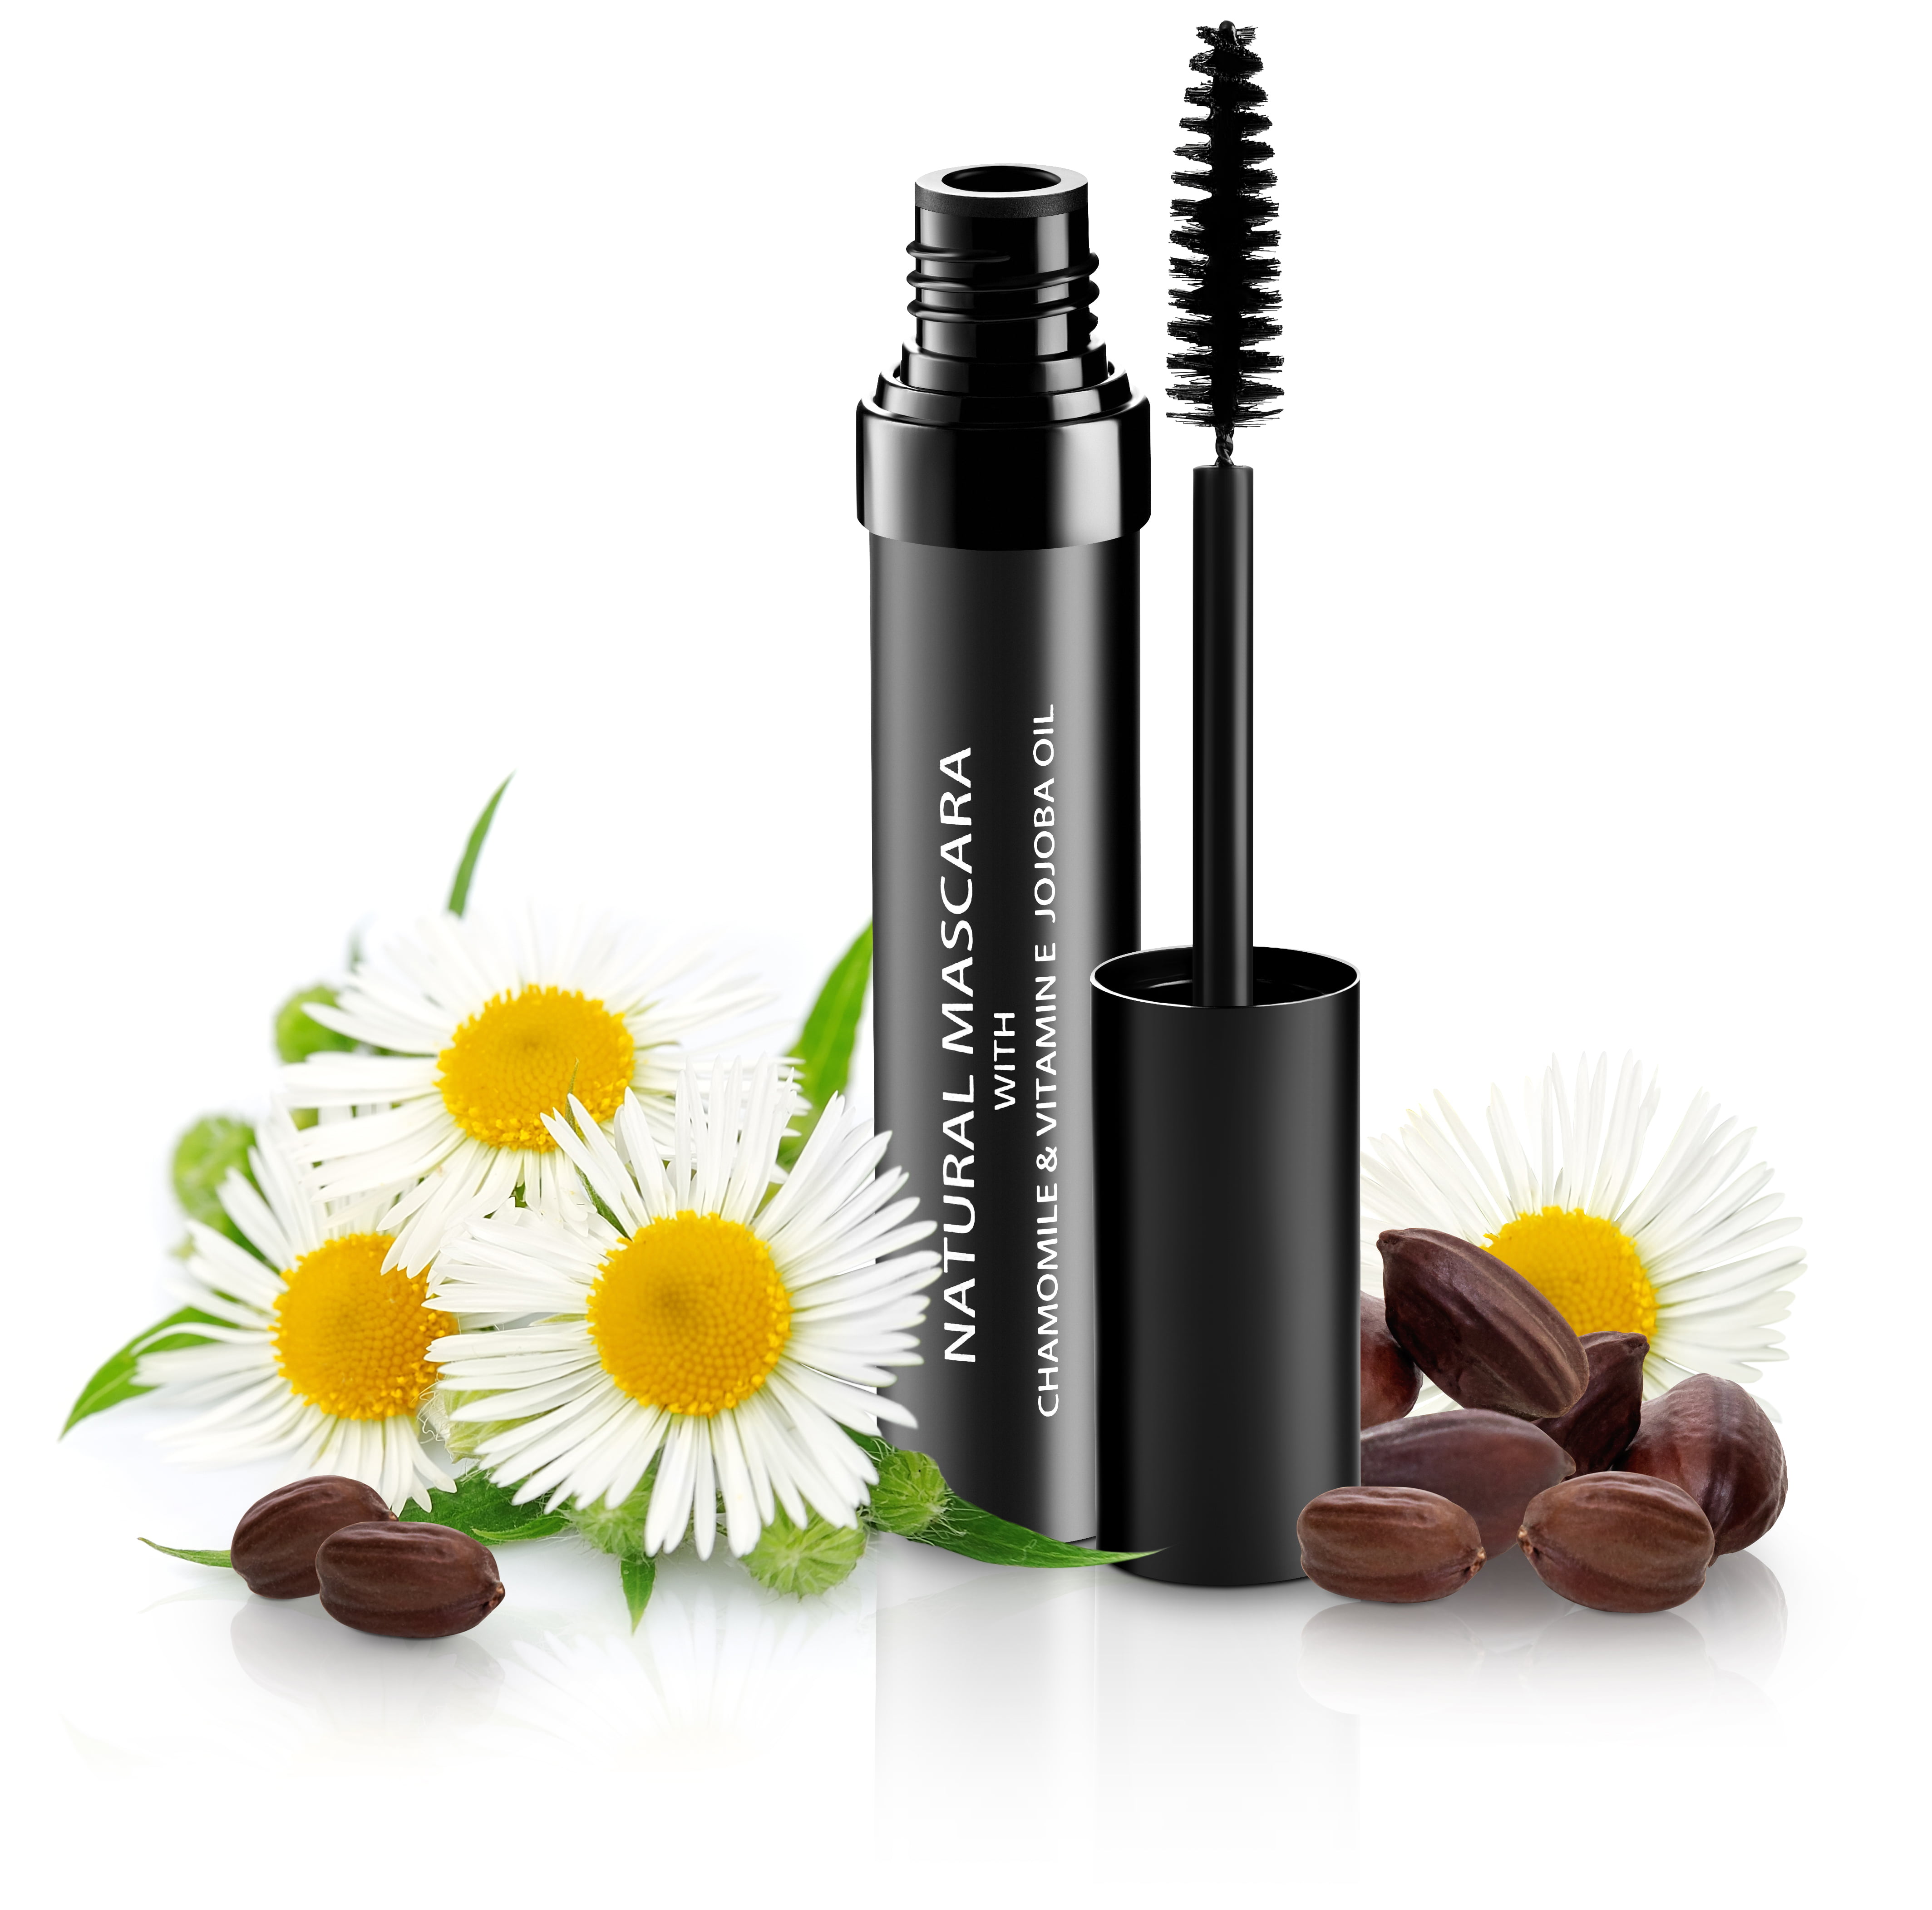 Natural Organic Mascara | 100% Natural Enriched With Chamomile, Vitamin Jojoba Oil | Vegan & Gluten Free, Nourishes and Conditions | Cruelty Free Safe For Sensitive Eyes - Walmart.com